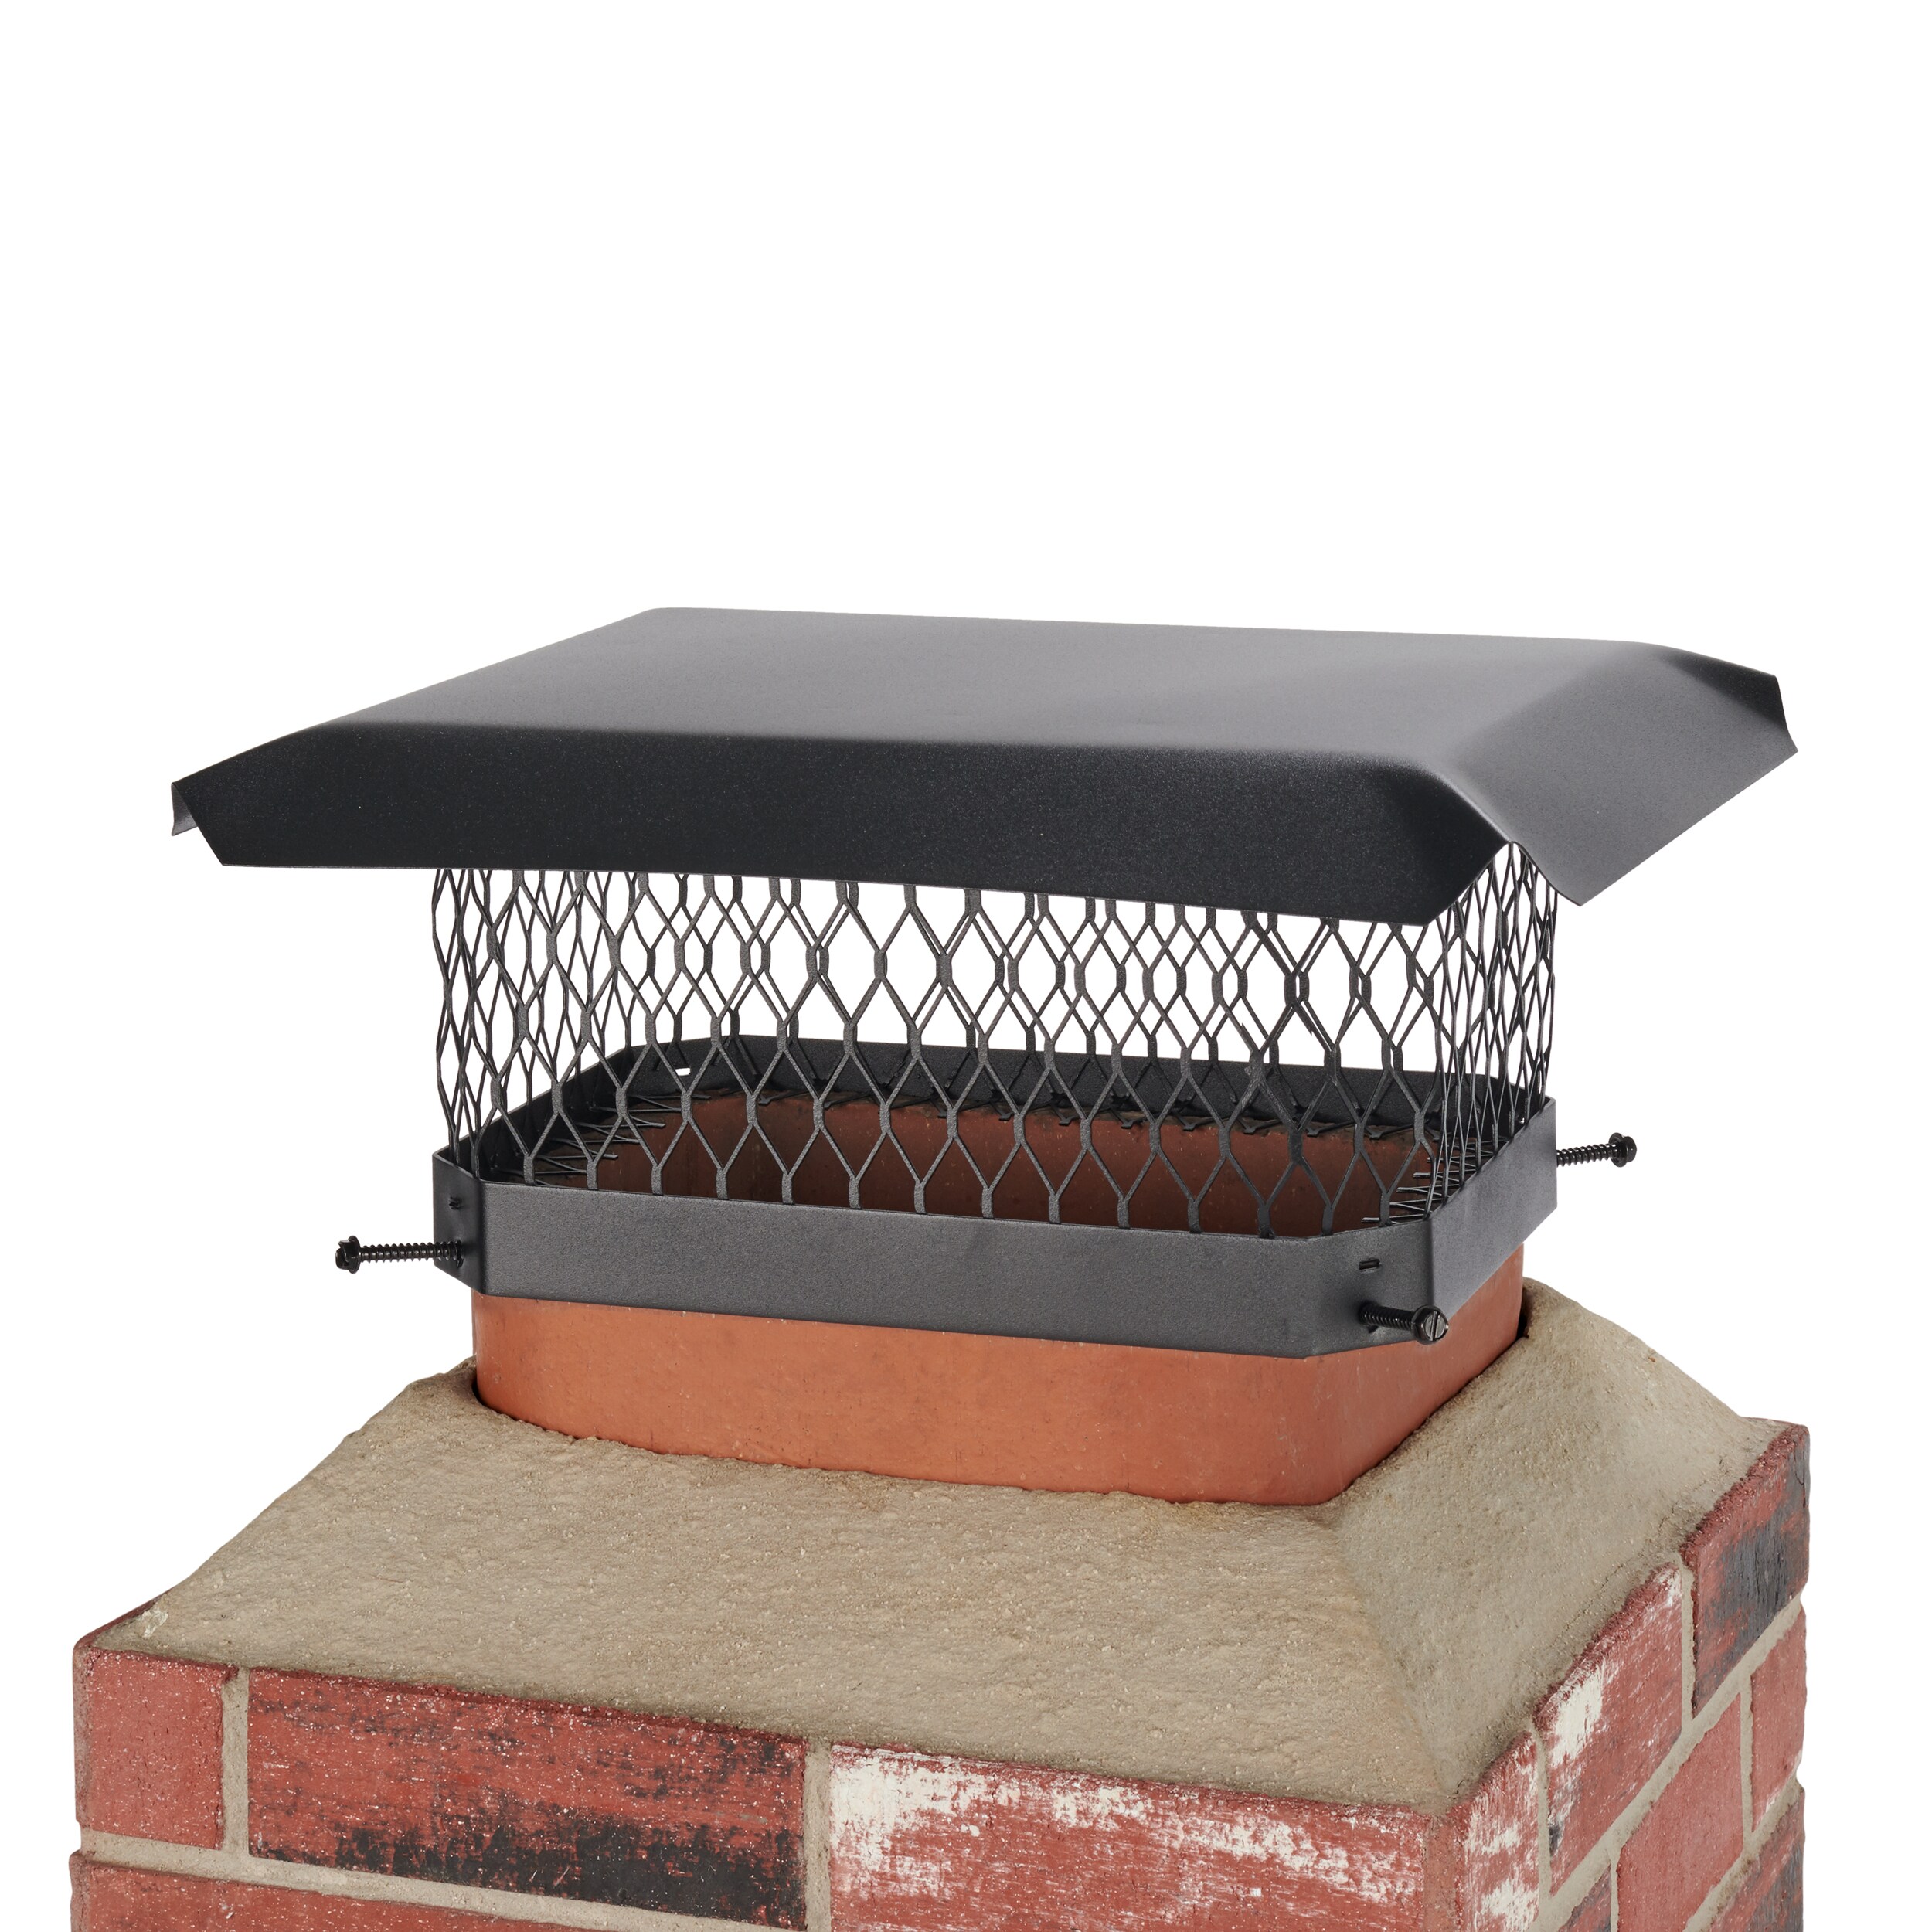 Chimney Cap 9 in Black Galvanized Steel Fixed Replacement Hardware x 13 in 